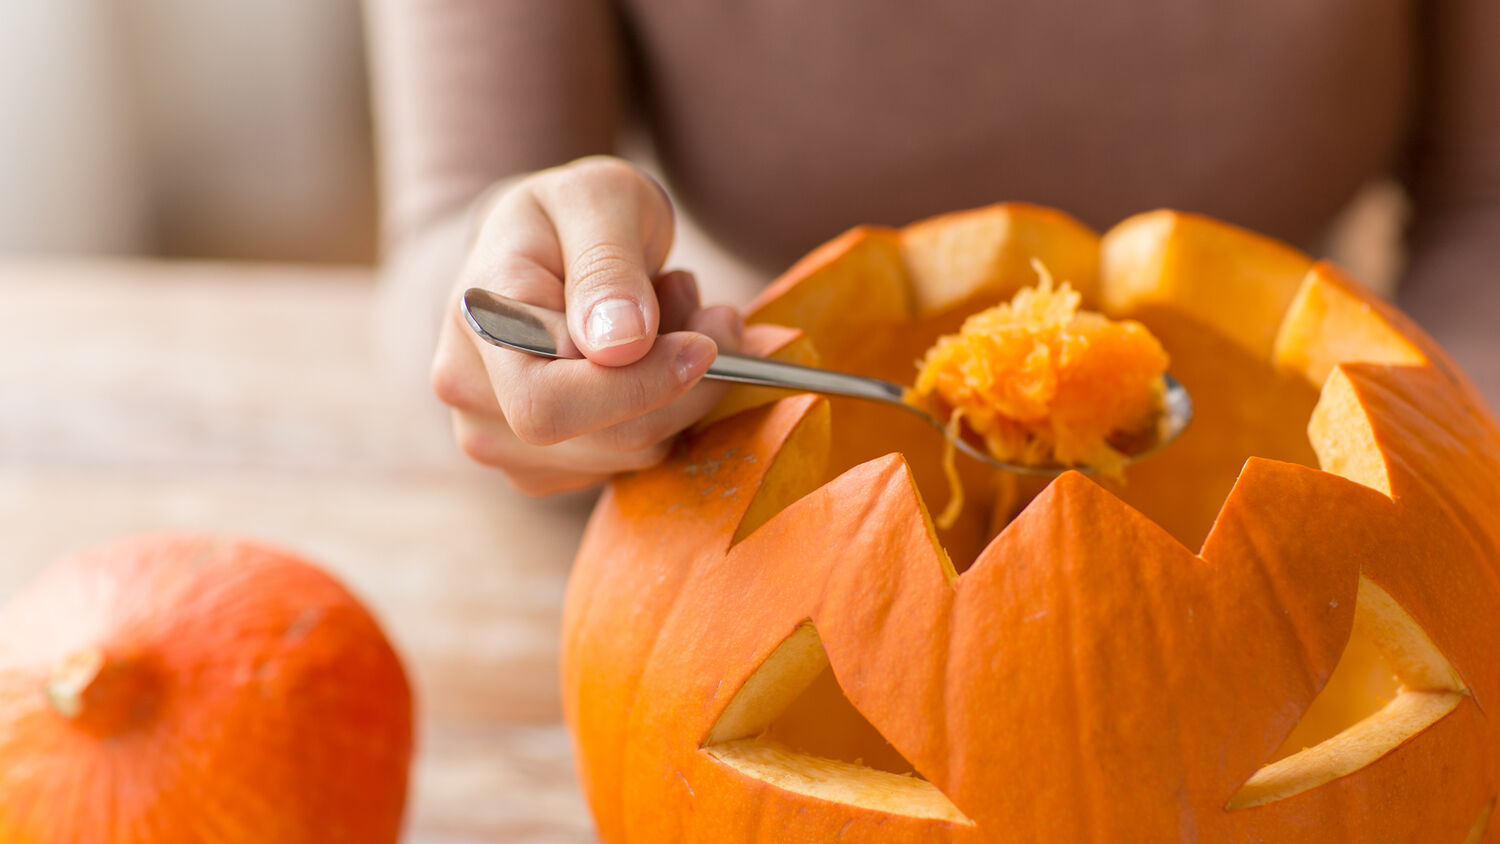 A lady scoops out flesh from a pumpkin that has been carved with a spooky face.